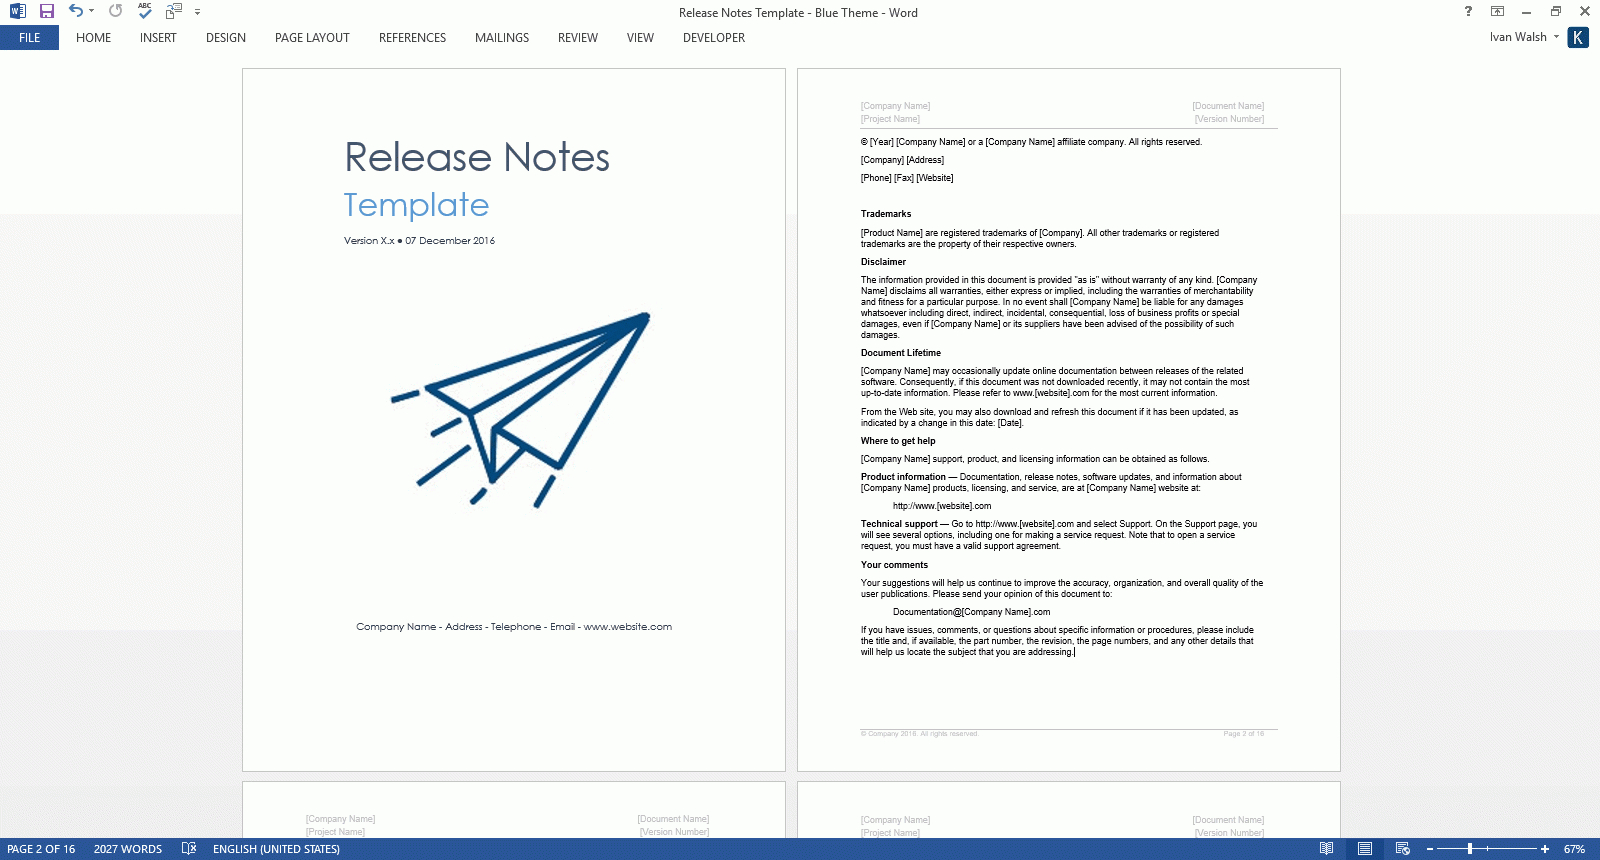 Release Notes Best Practices With Salesforce And Dropbox Examples pertaining to Software Release Notes Template Word